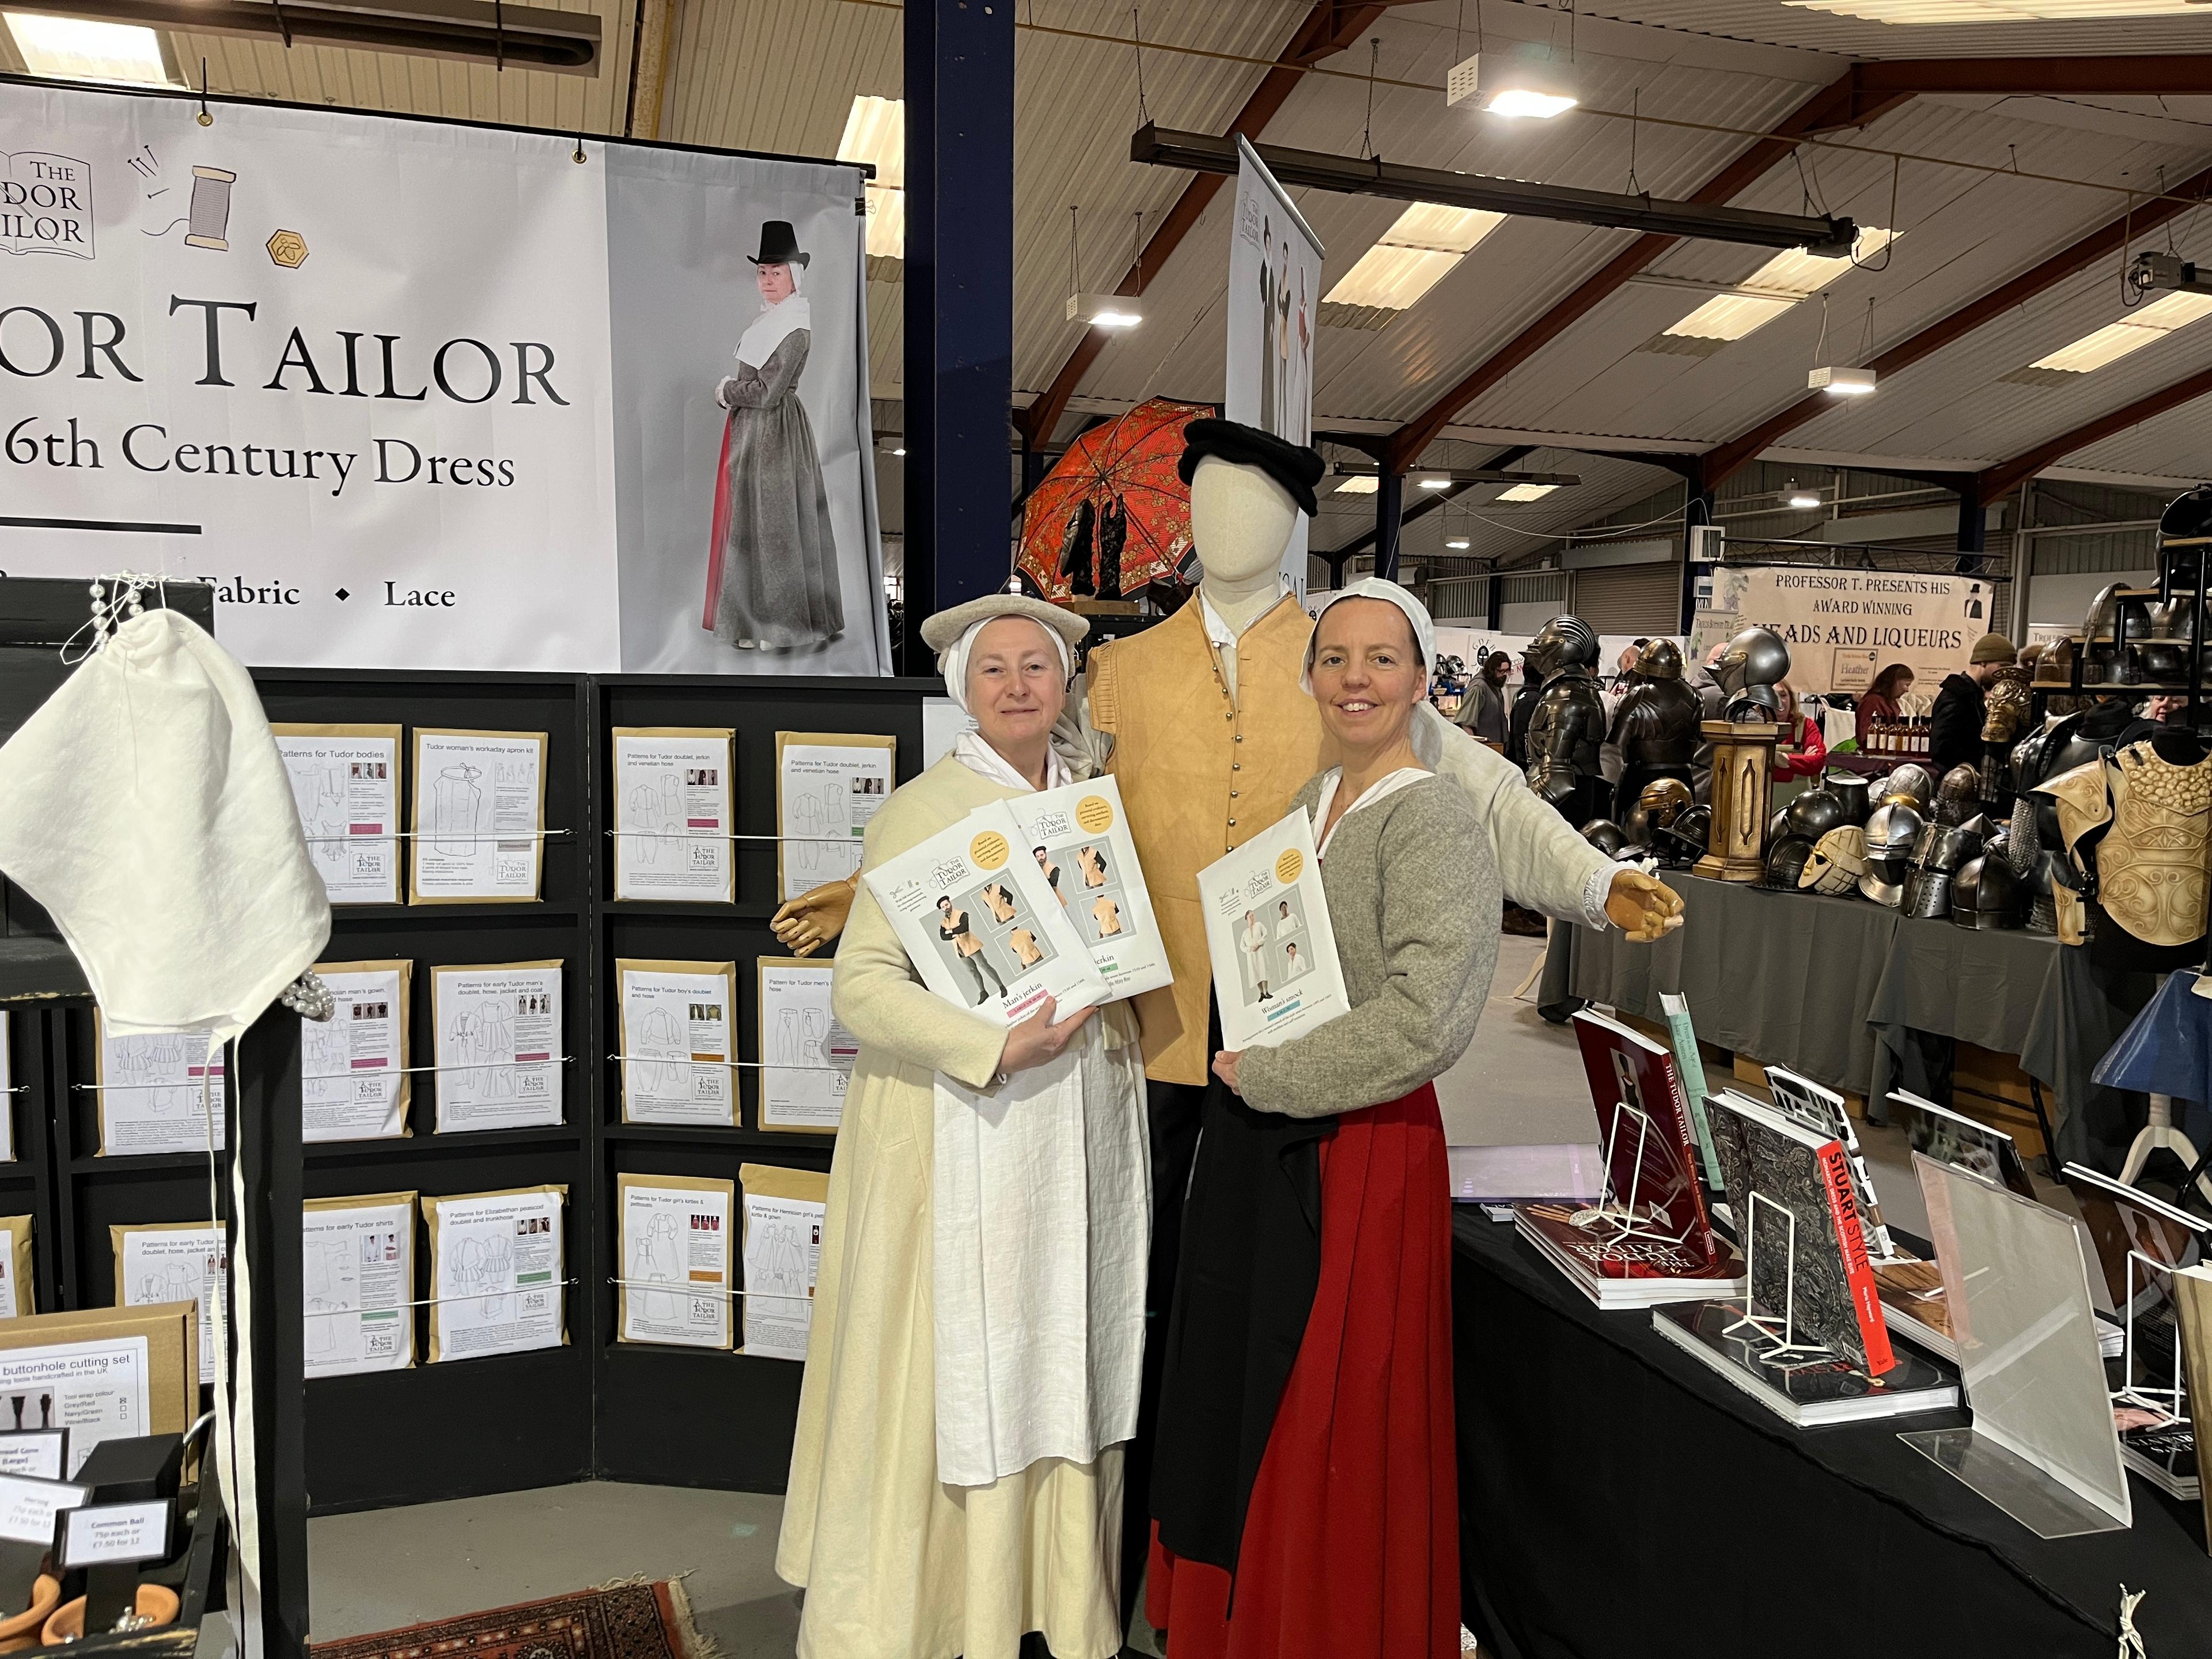 Jane and Ninya launched the new patterns for men’s jerkins and women’s smocks at the recent Artisans and Reenactors Market